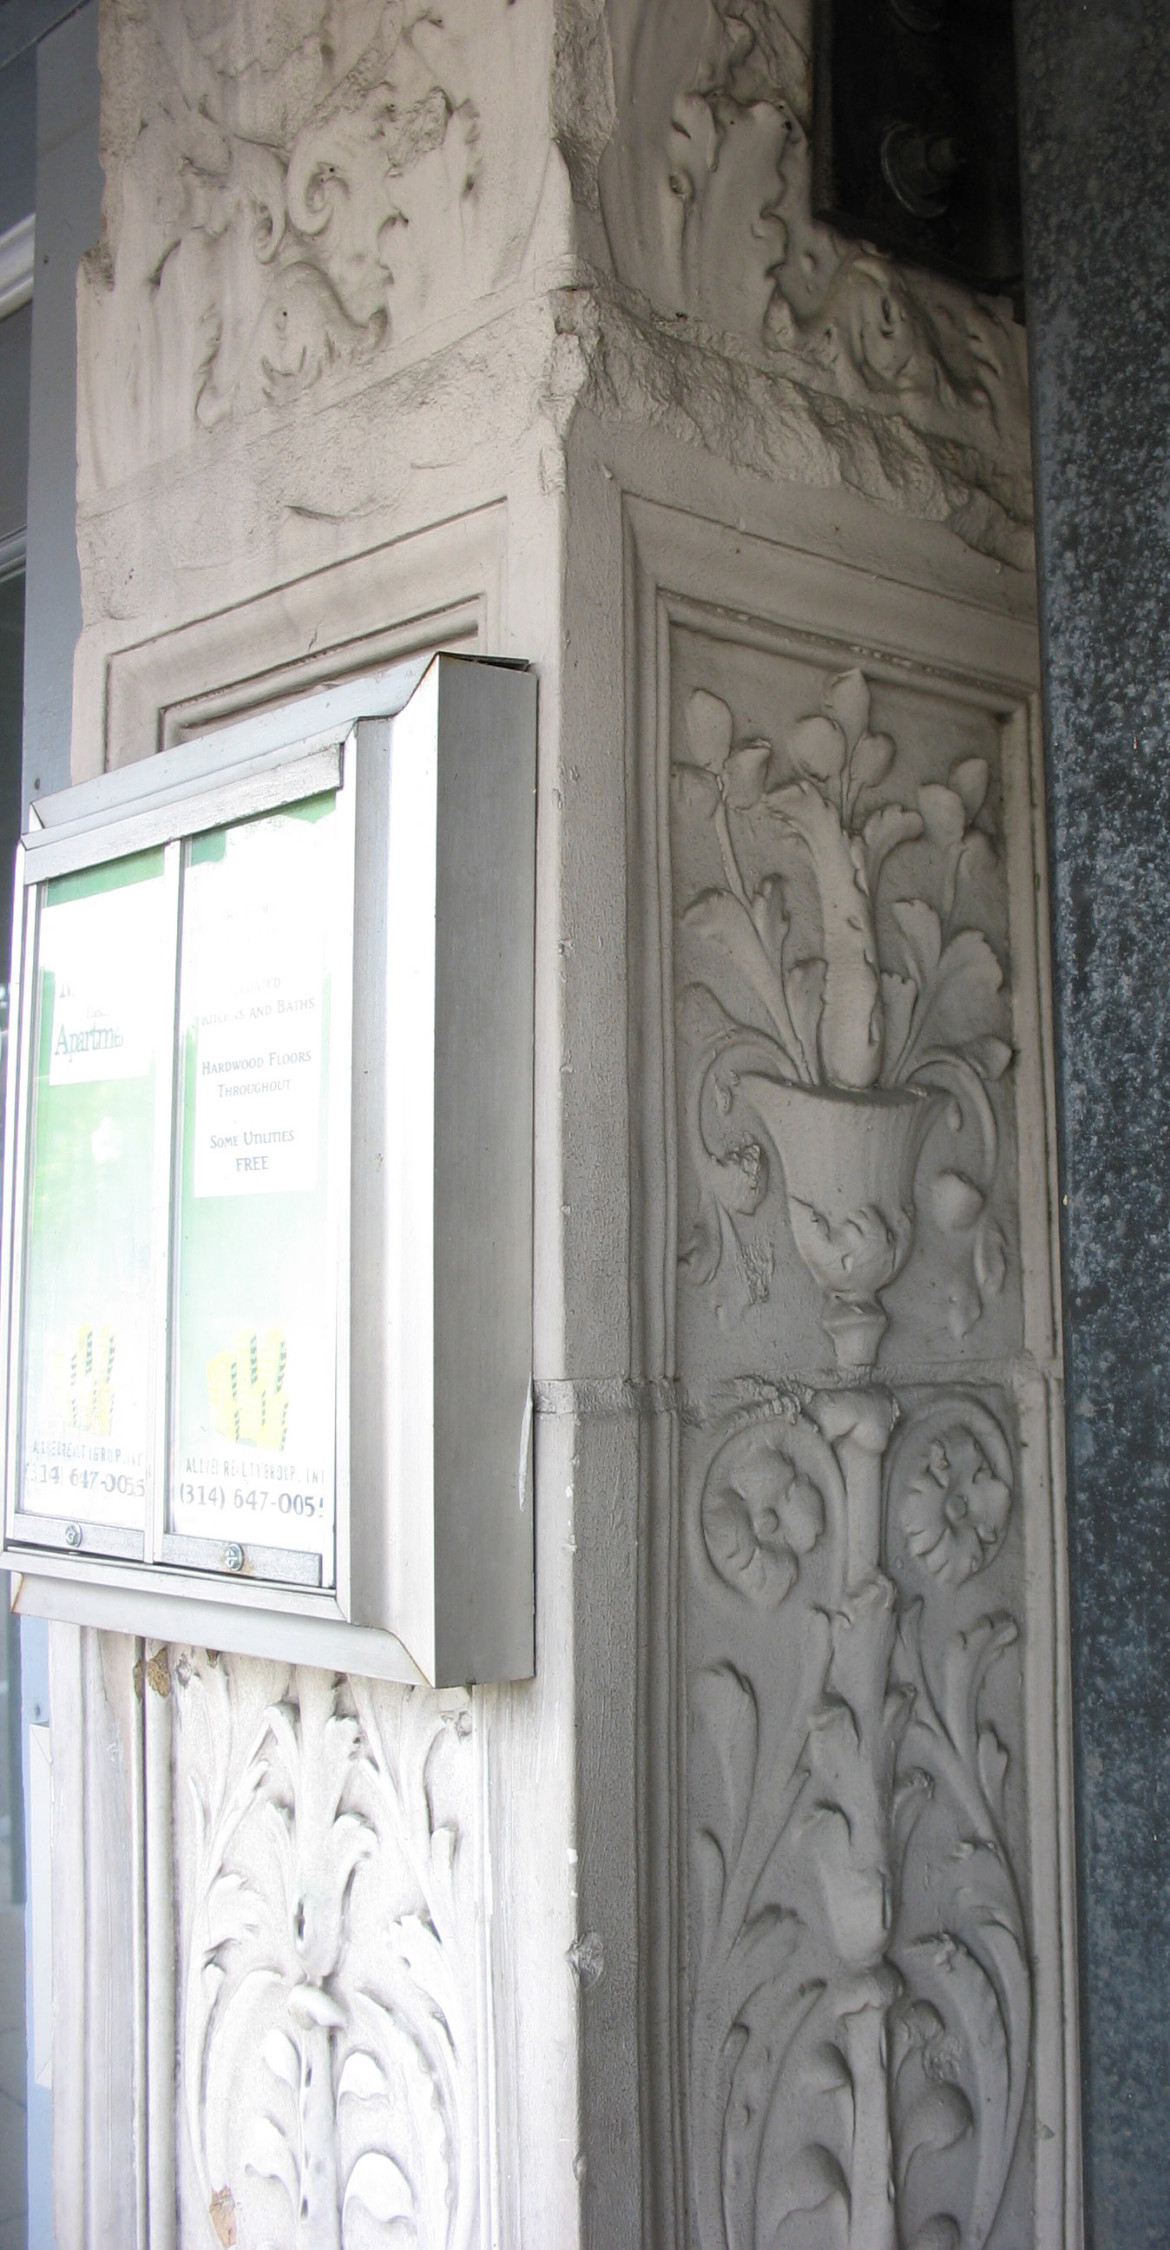 Classically ornamented terra cotta next to the former entrance to the theater.